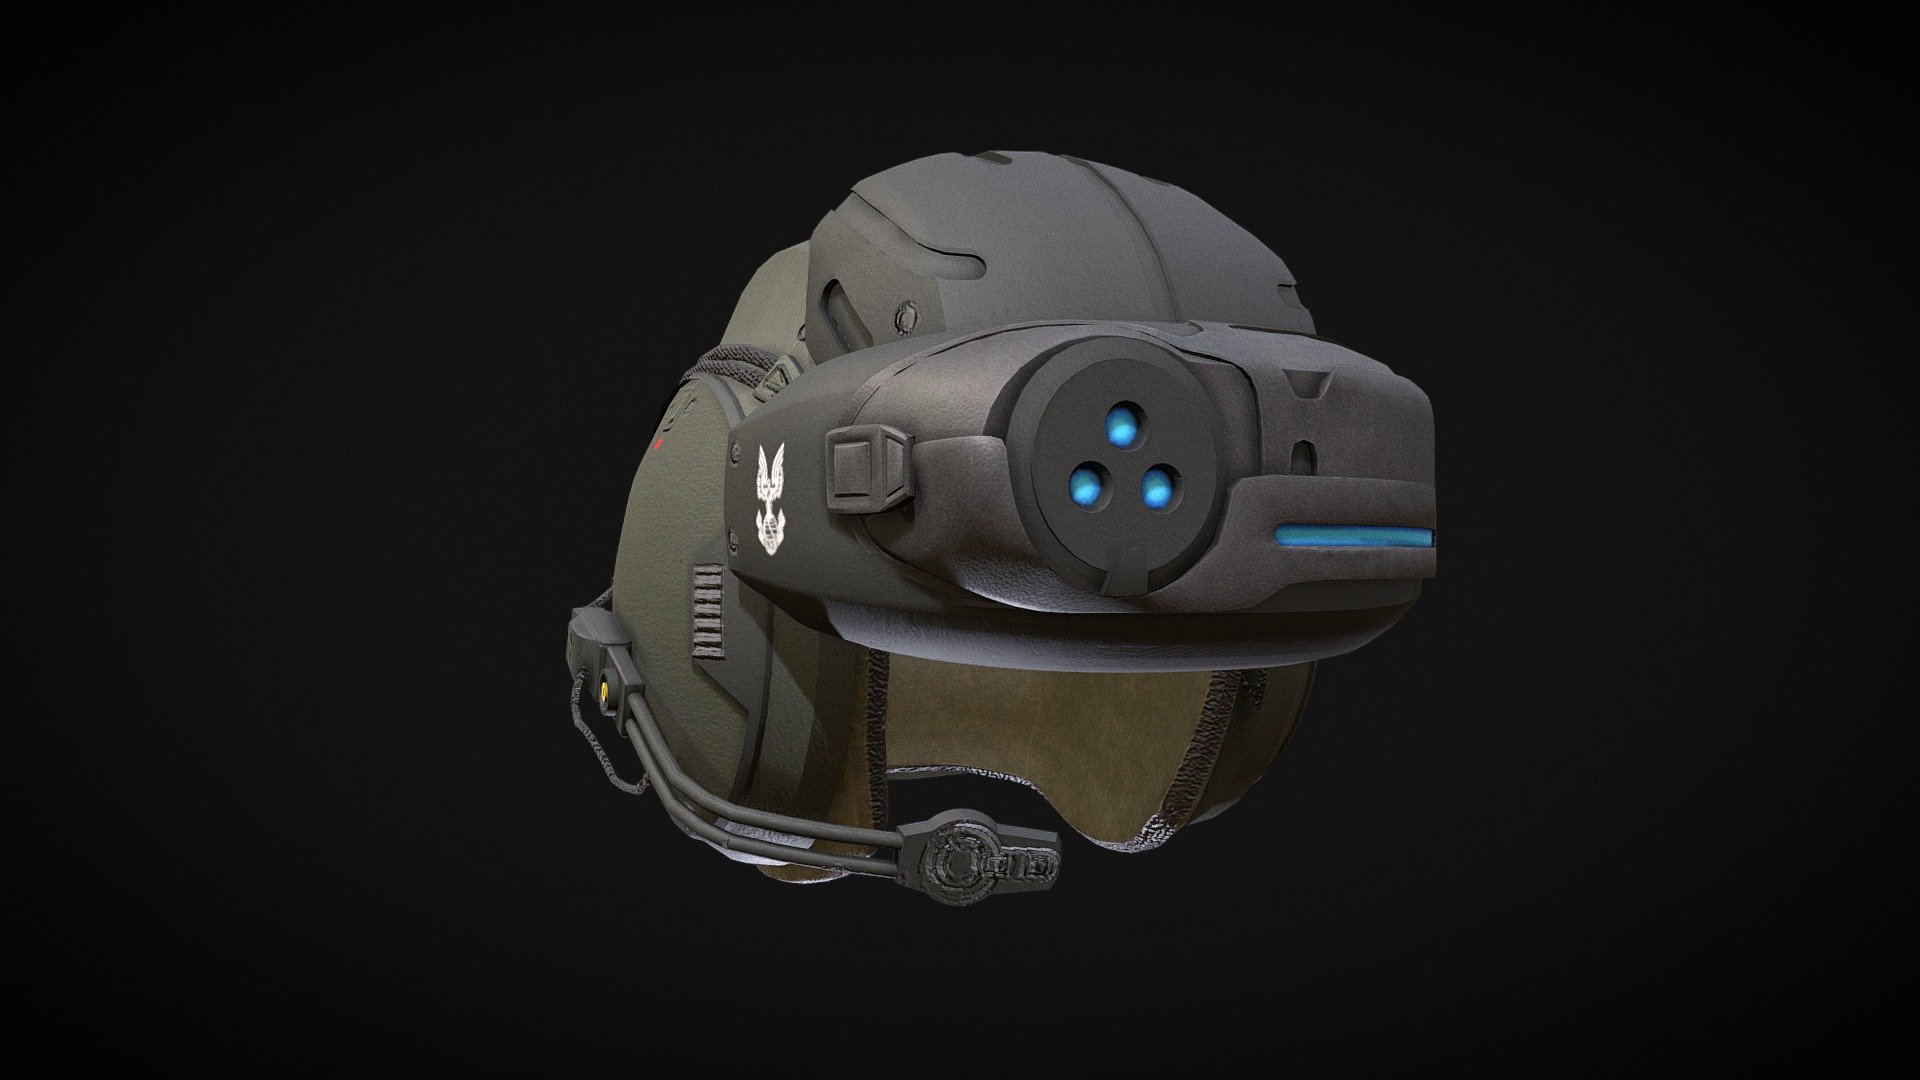 Halo CE Echo 419 Helmet - Model/Art by Outworld Studios

Must give credit to Outworld Studios if using the asset.

Show support by joining my discord: https://discord.gg/EgWSkp8Cxn - Halo CE Echo 419 Helmet - Buy Royalty Free 3D model by Outworld Studios (@outworldstudios) 3d model